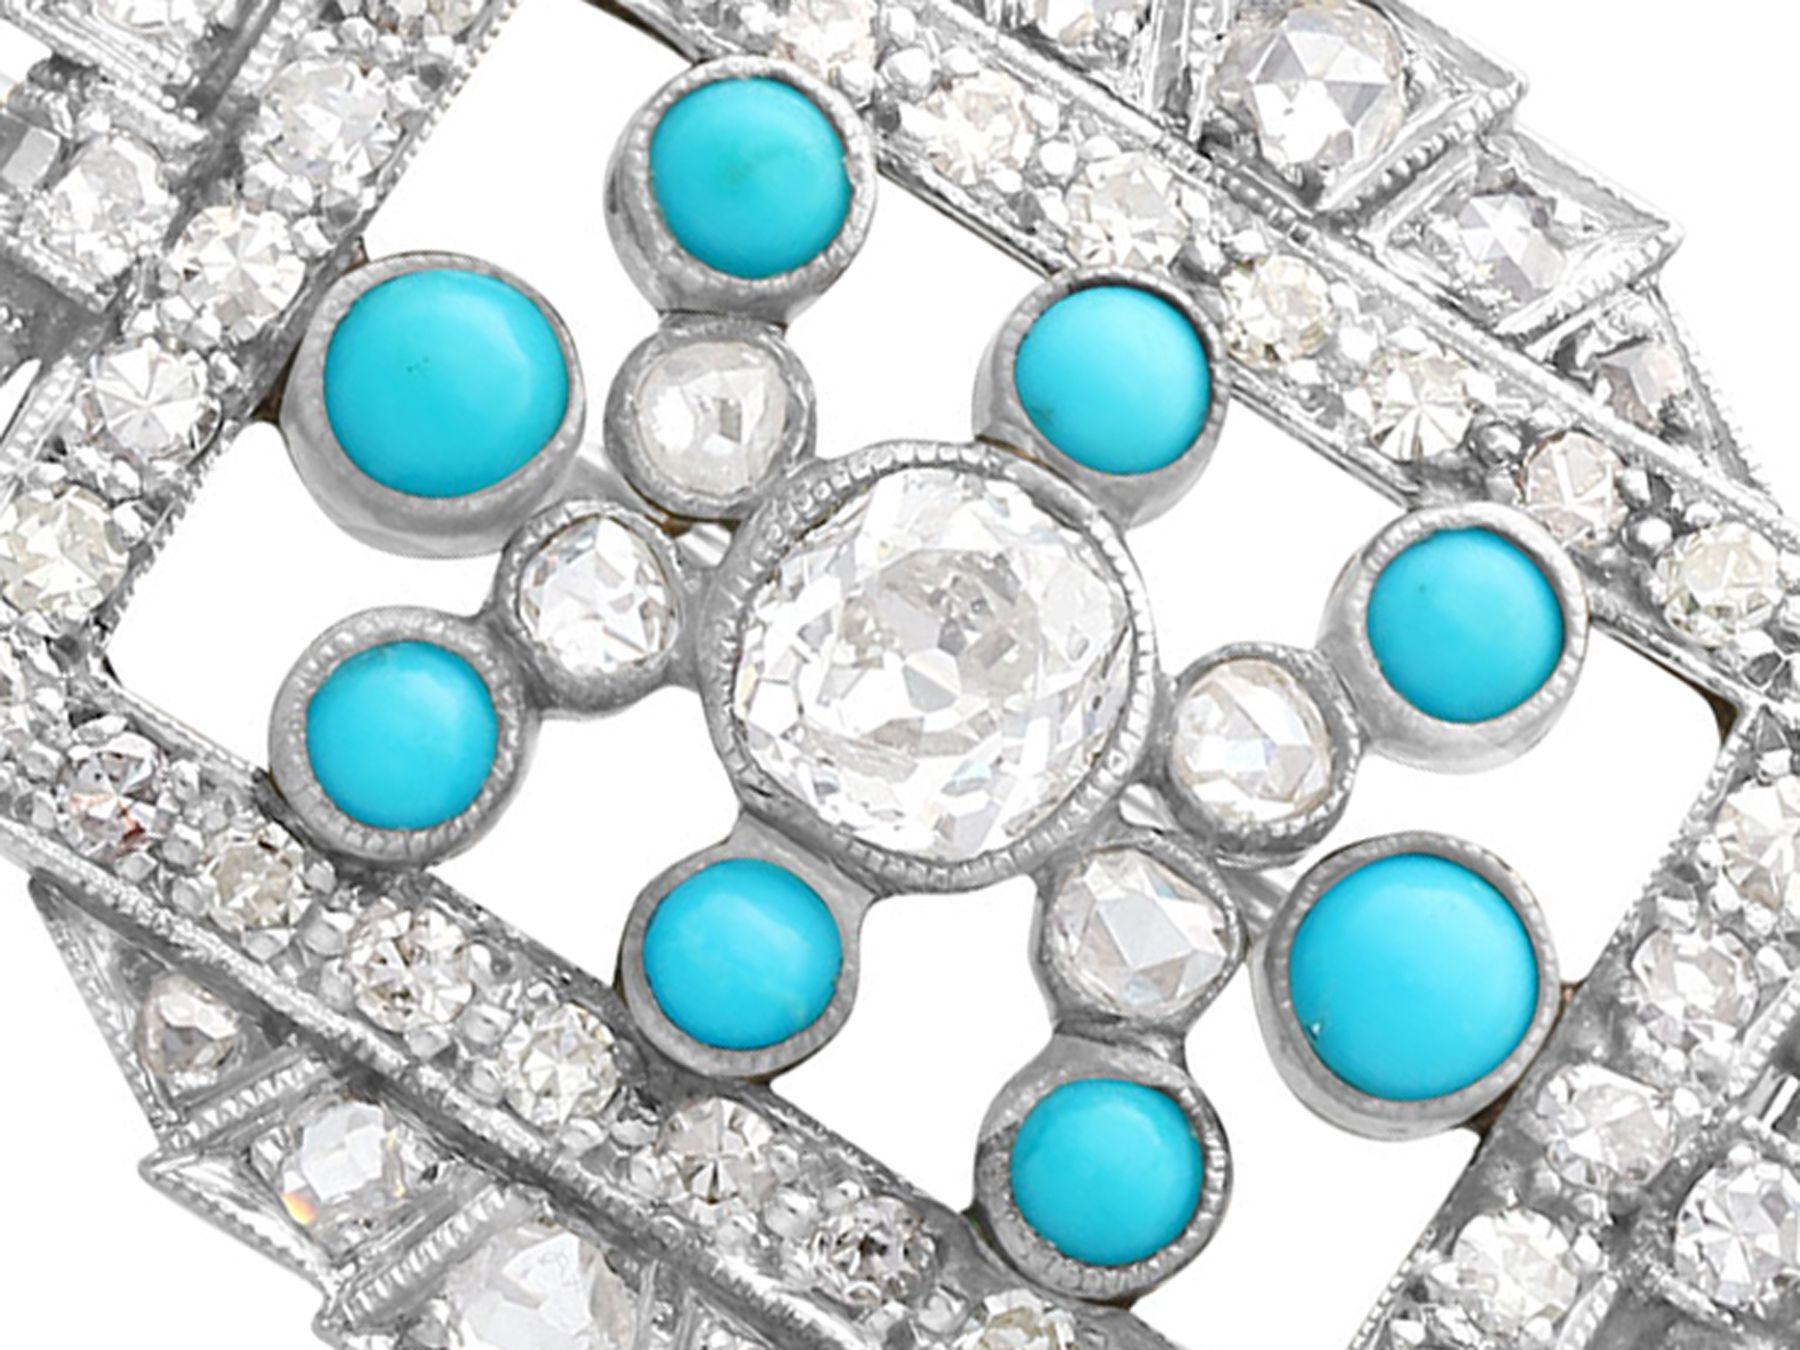 A fine and impressive vintage turquoise and 1.71 carat diamond, 18 karat white gold brooch in the Art Deco style; part of our diverse vintage jewelry and estate jewelry collections

This fine vintage turquoise brooch has been crafted in 18k white